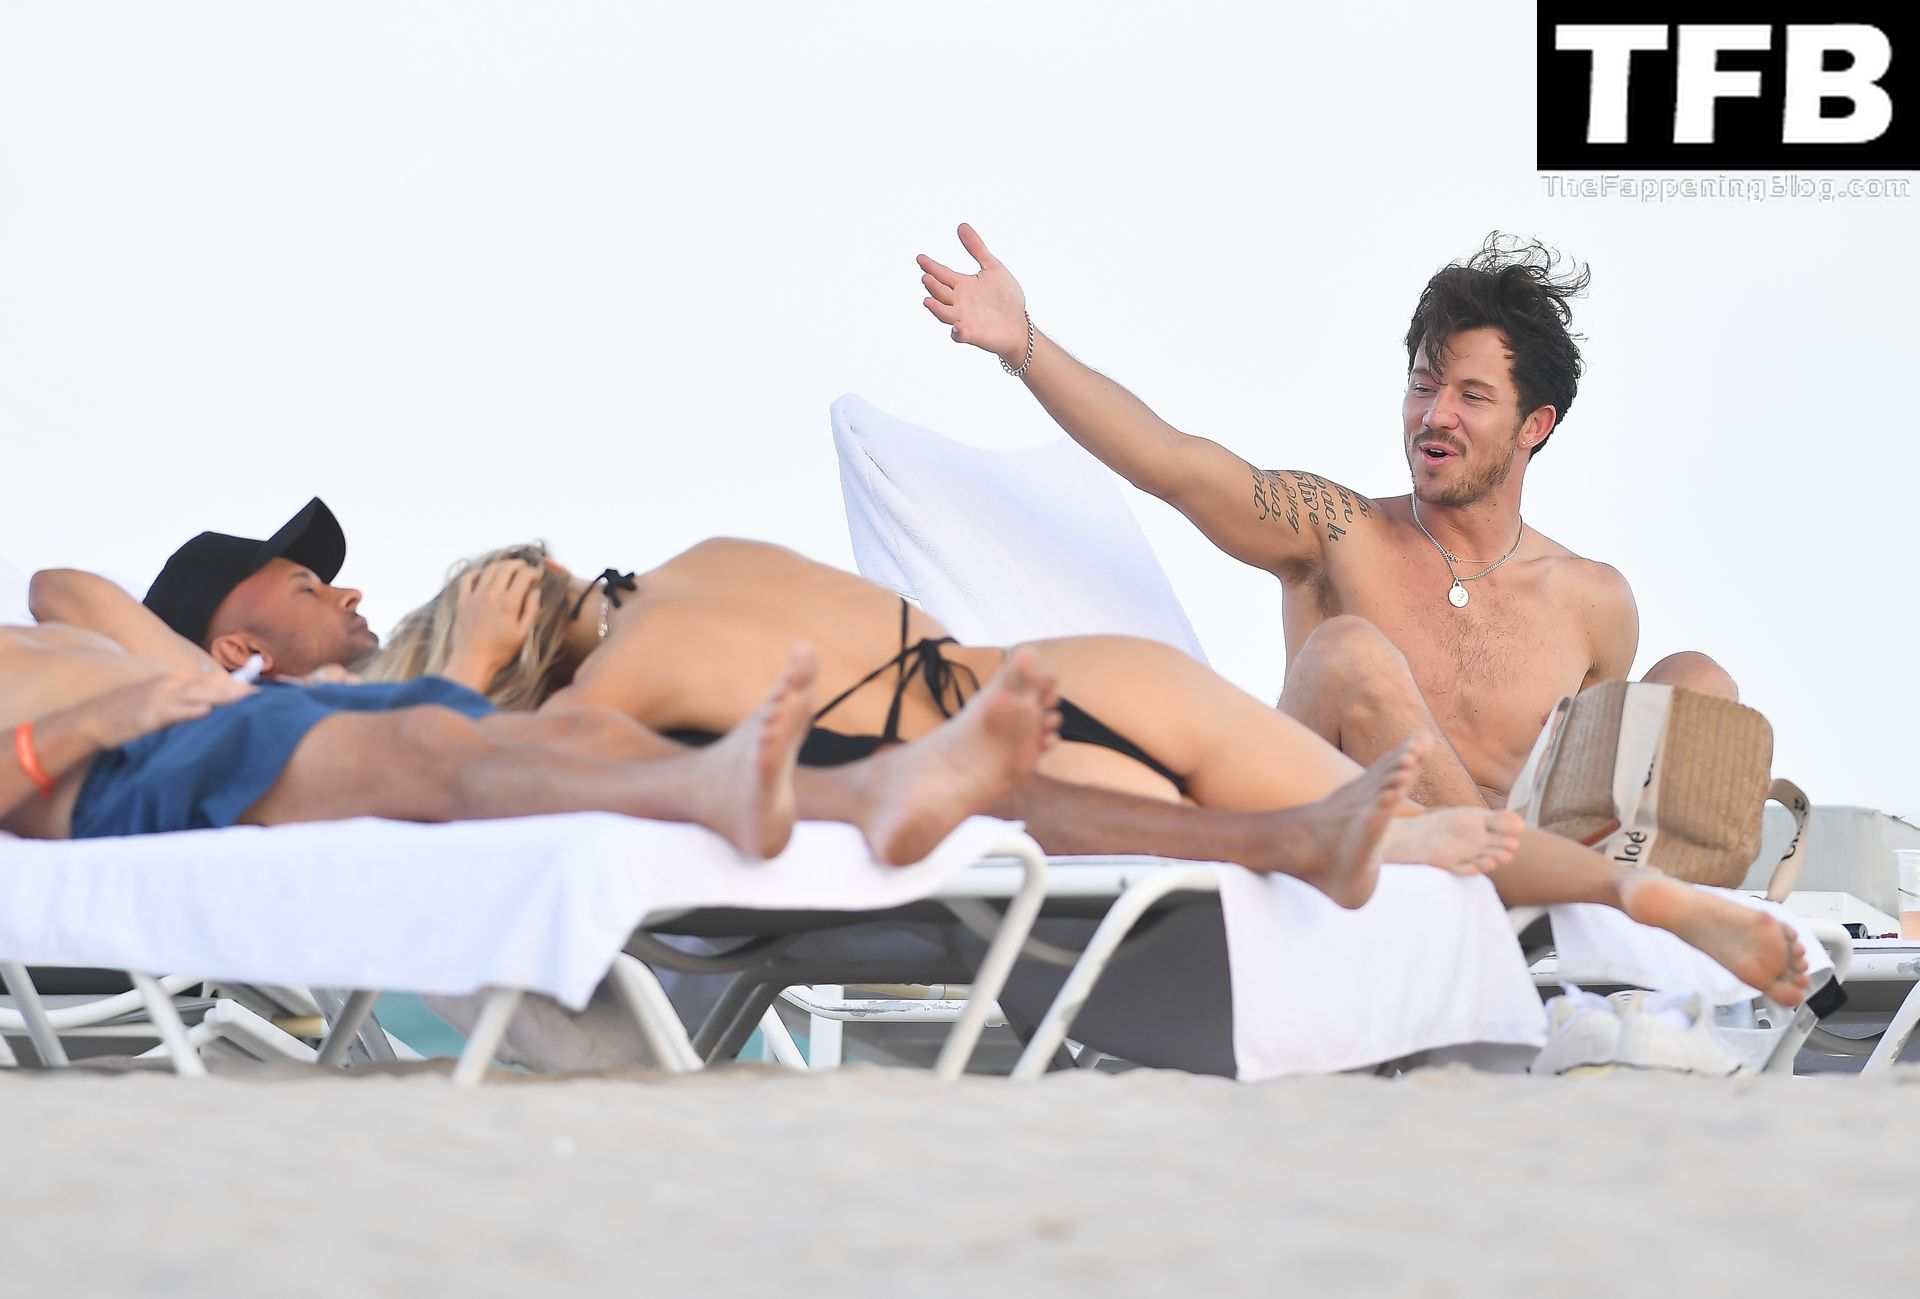 Joy Corrigan Hits the Beach with Ted Dhanik &amp; Tom Anderson in Miami (54 New Photos)